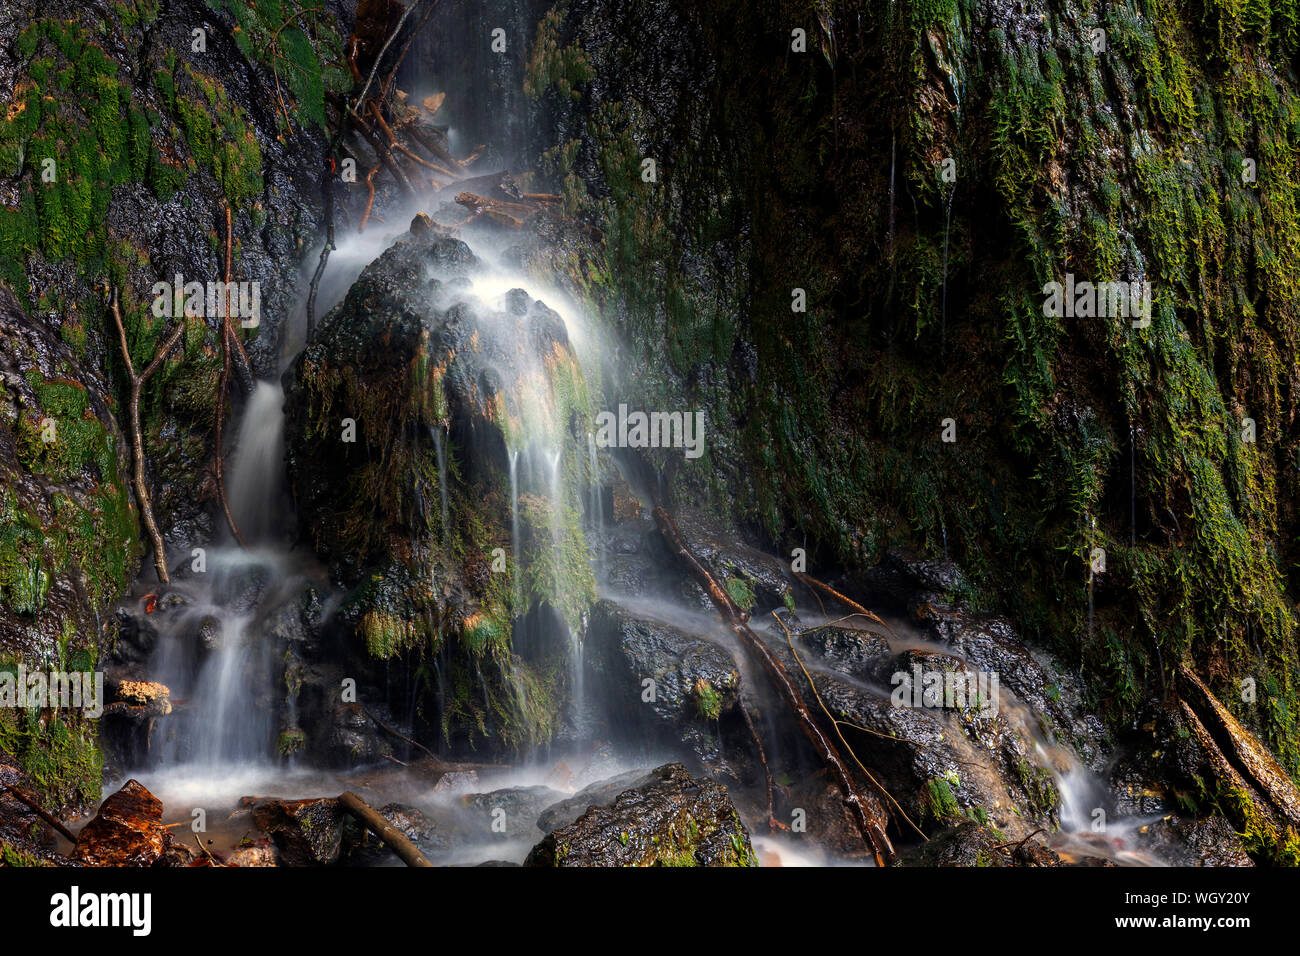 Tannegger Waterfall with its bizarre tufa formation in the Wutach Gorge Nature Reserve, Black Forest, Baden-Württemberg, Germany Stock Photo